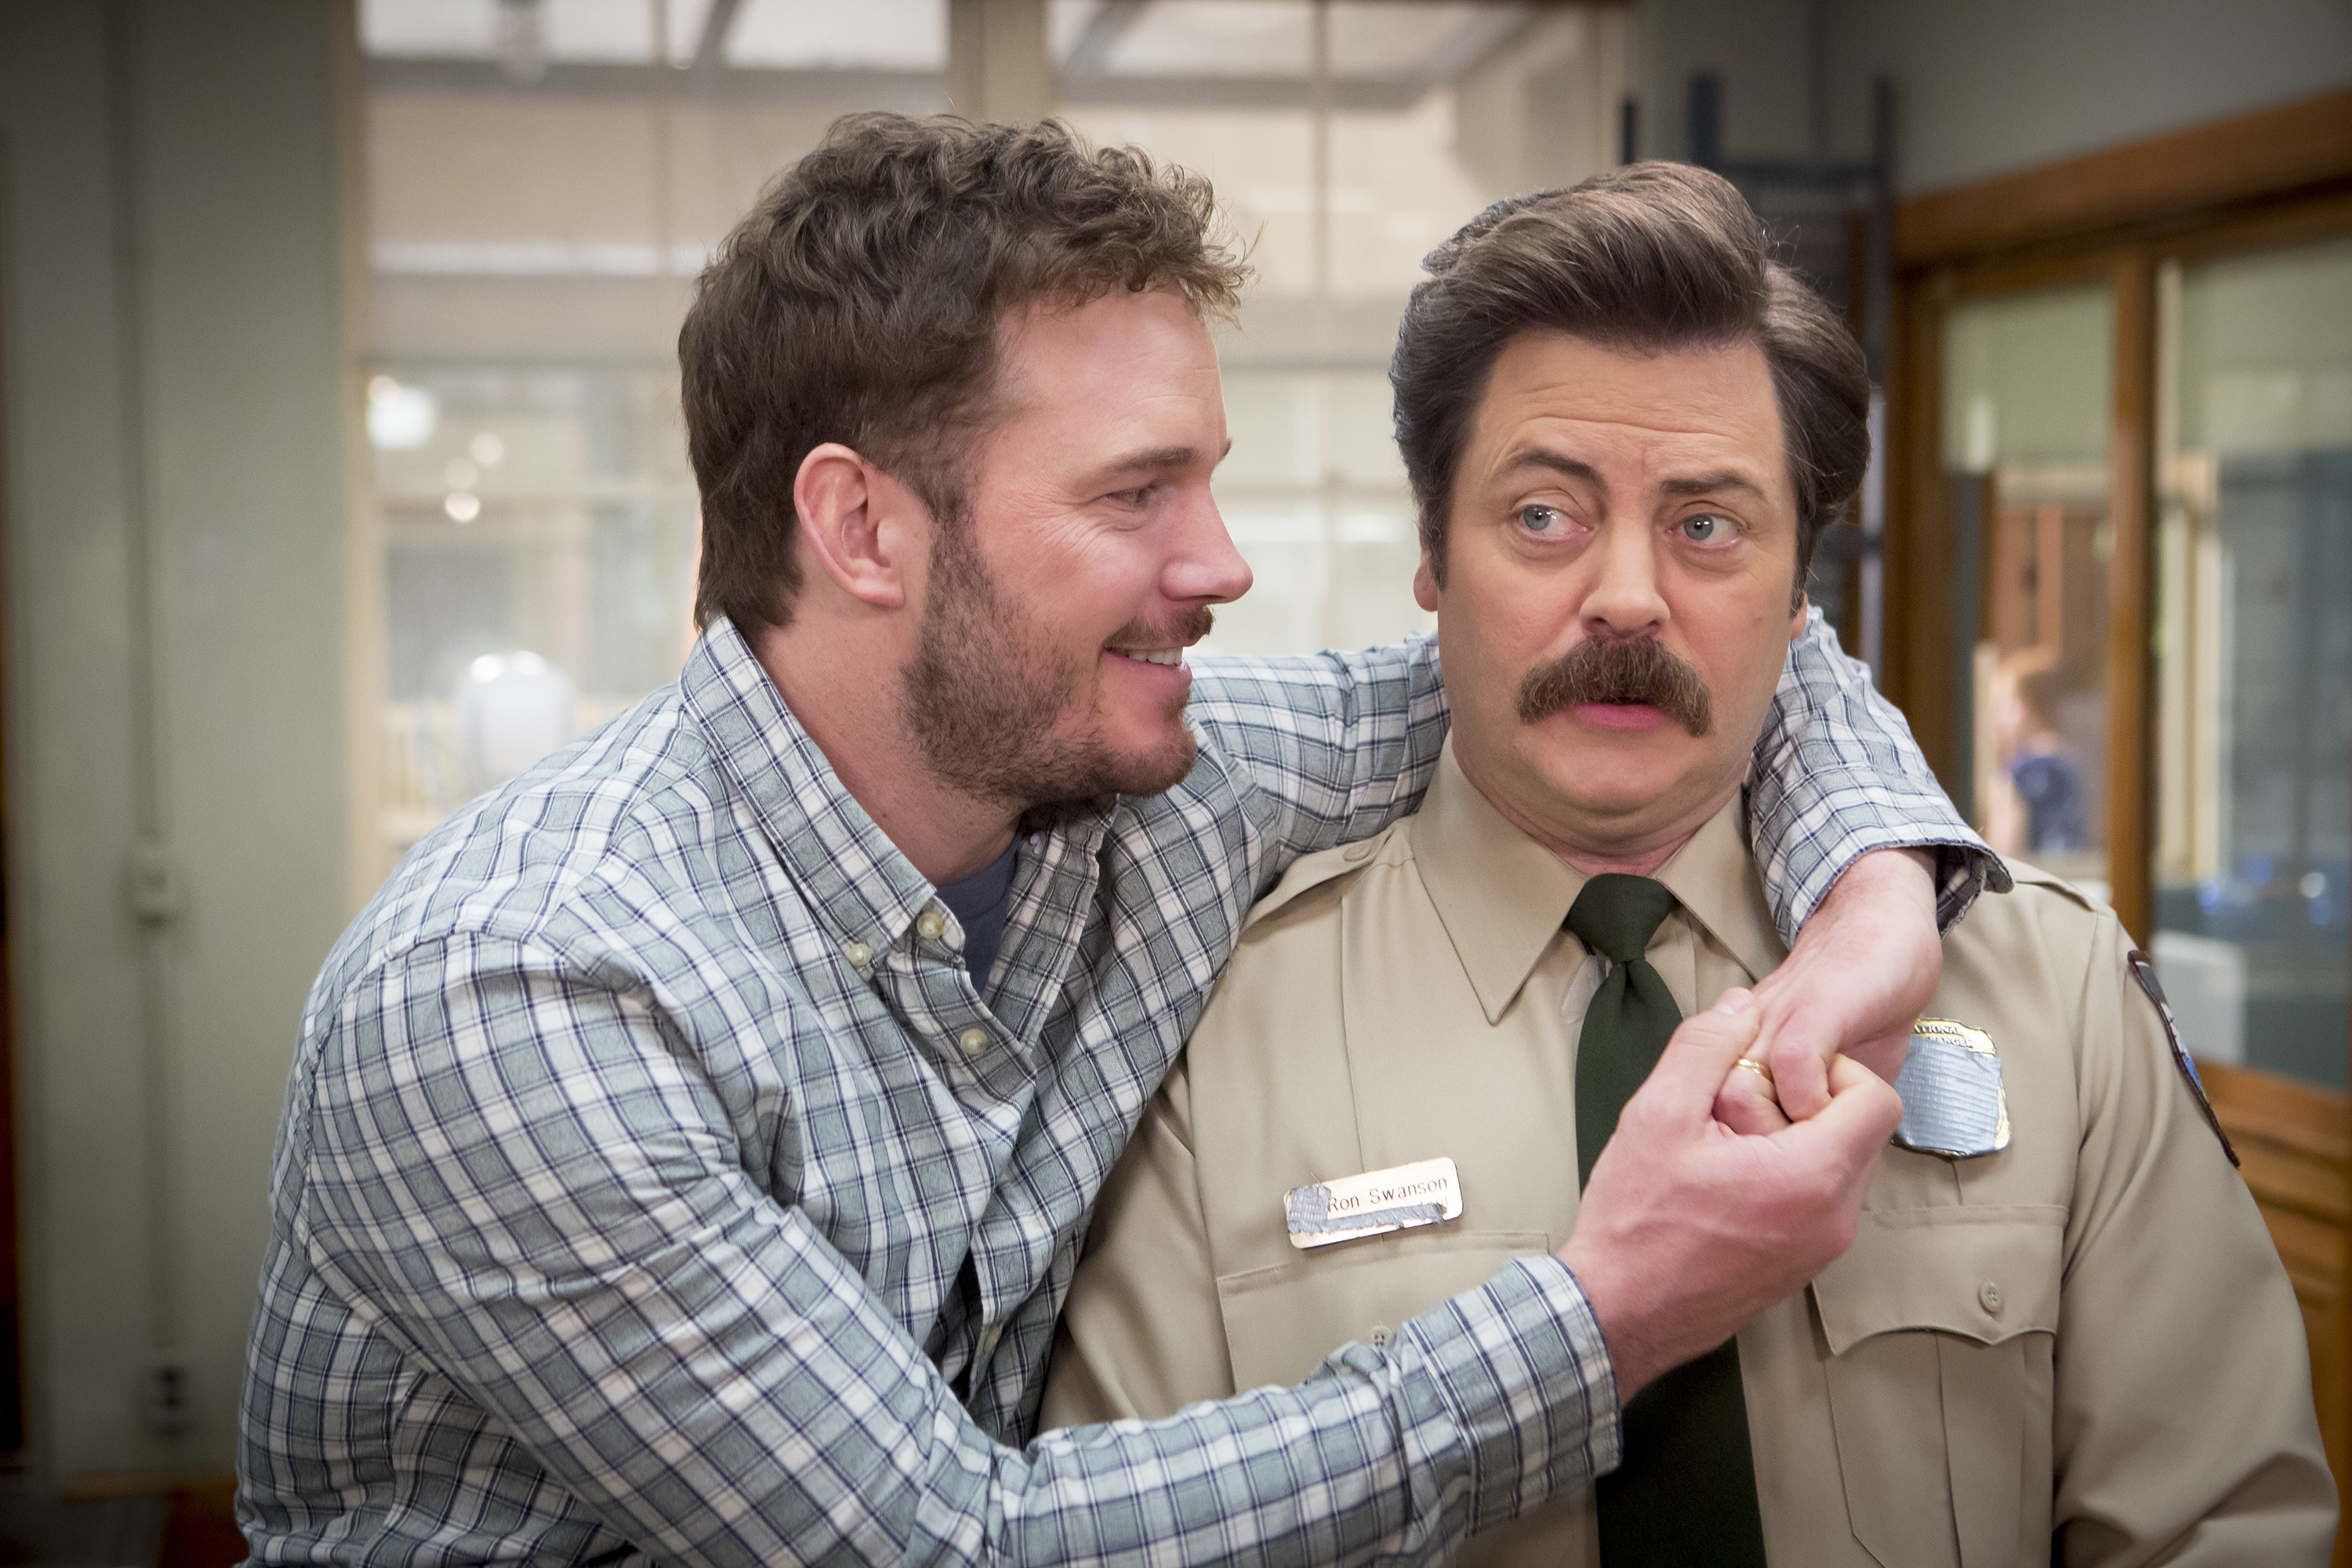 Parks and Recreation cast members Chris Pratt and Nick Offerman